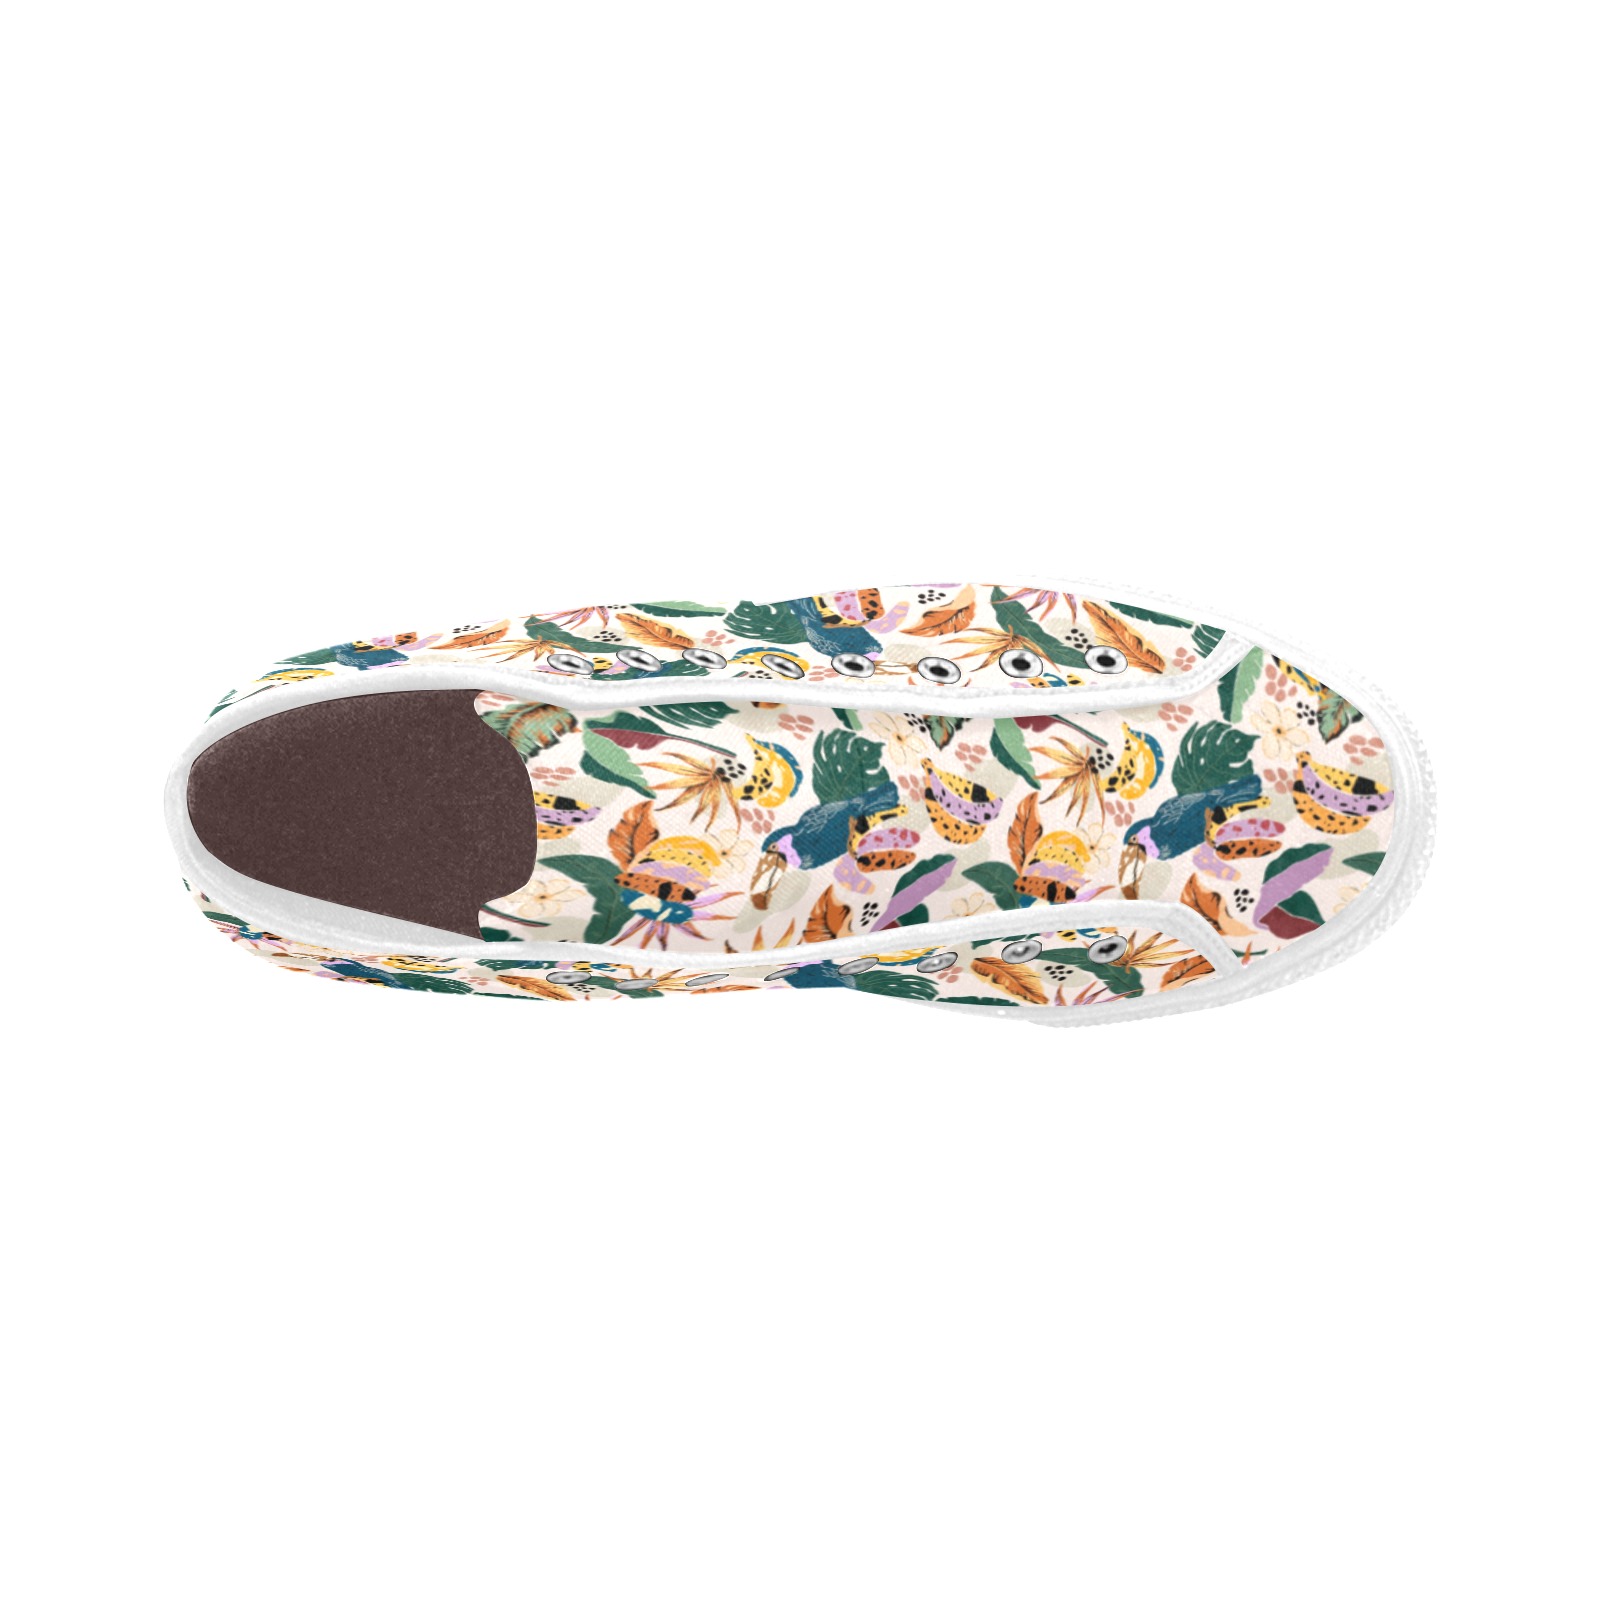 Toucans in wild tropical nature Vancouver H Women's Canvas Shoes (1013-1)